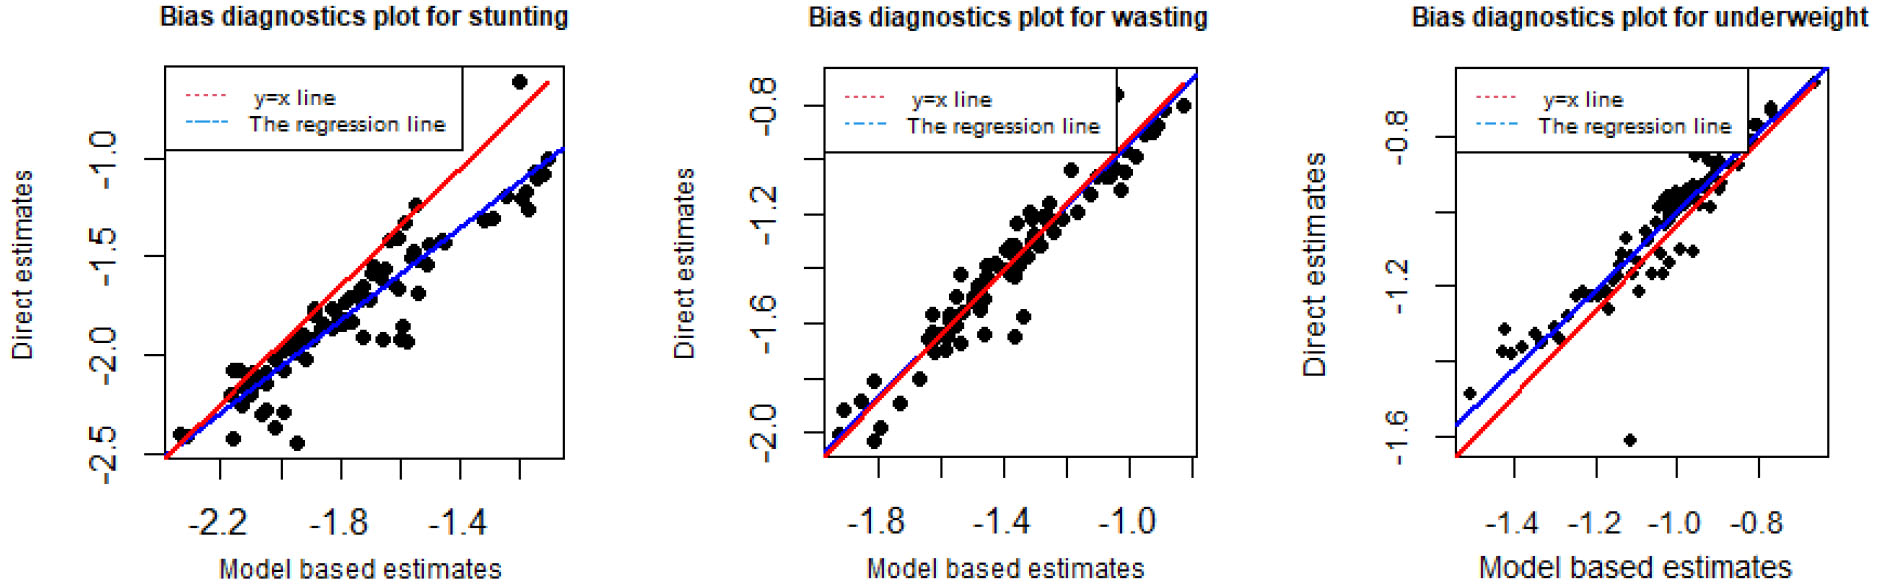 Bias diagnostic plot with y=x line (red line) and regression line (blue line) for stunting, wasting and underweight for zones in Ethiopia: Model based MFH estimates versus direct estimates.